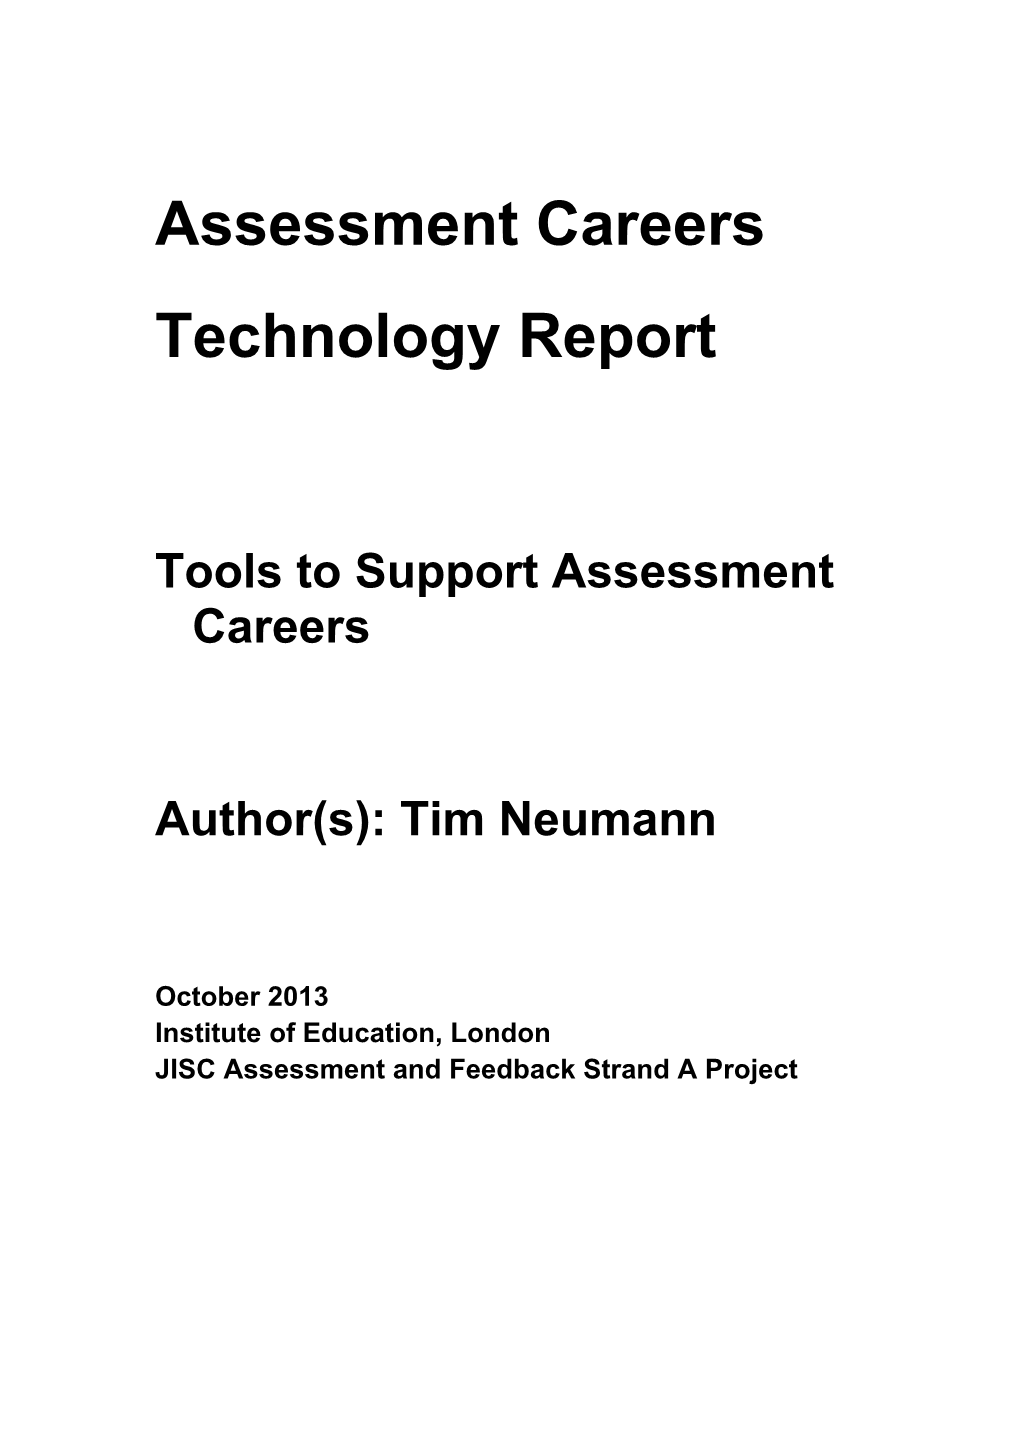 JISC Assessment Careers: Report on Tools to Support Assessment Careers